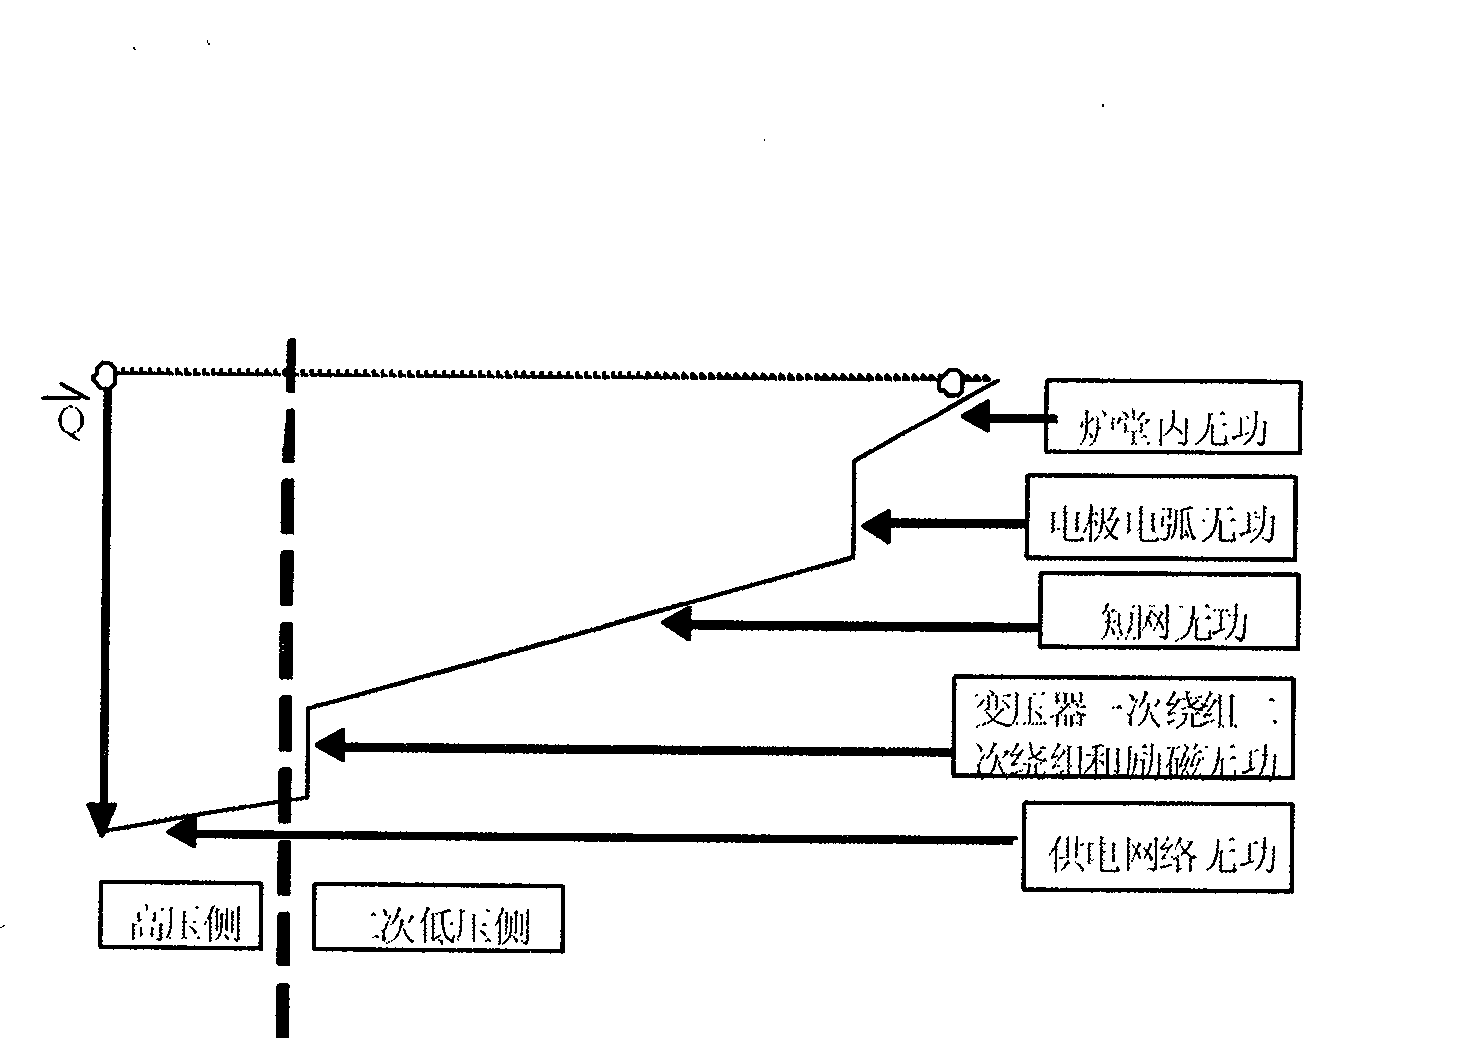 Single-phase connection method of ore furnace secondary low-voltage compensation device system